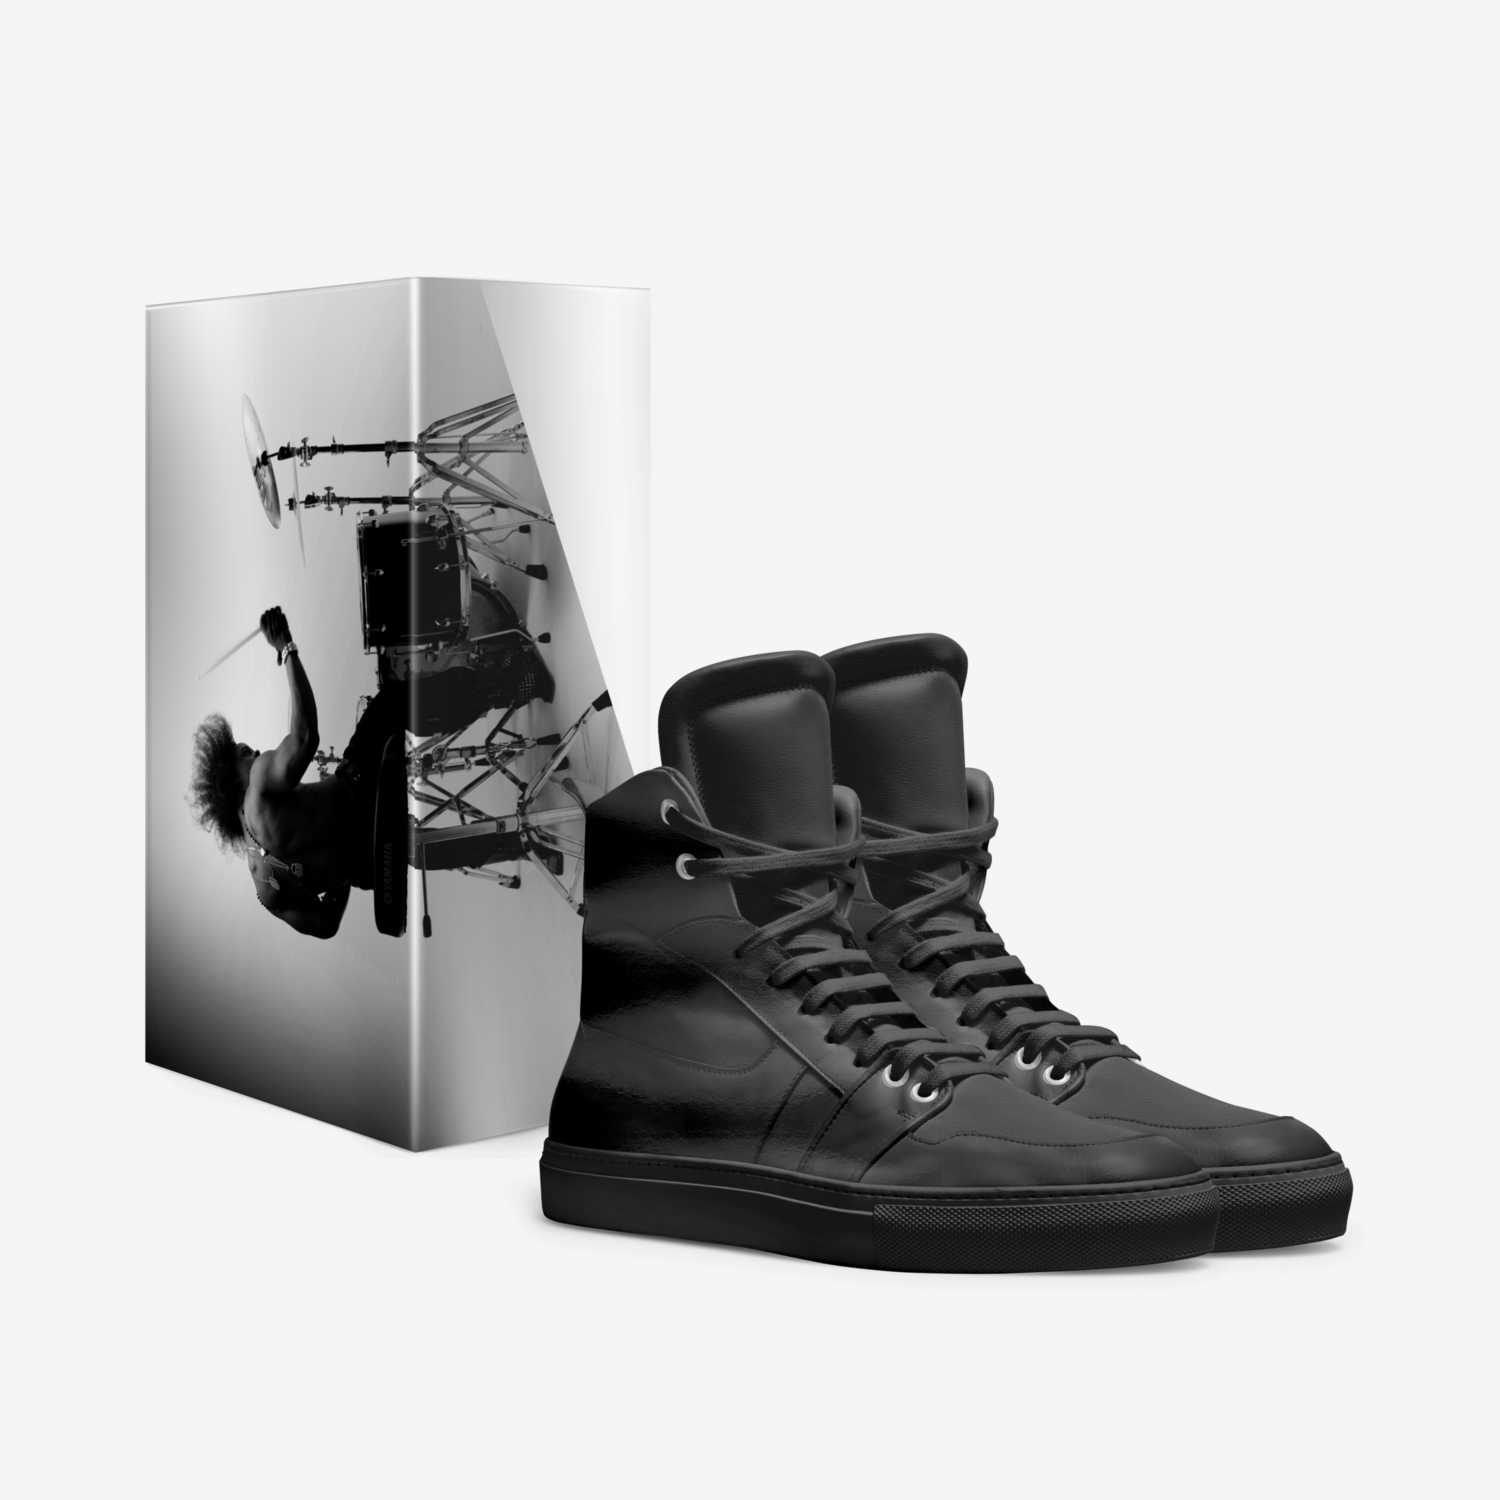 DRUMLUX STEALTH custom made in Italy shoes by Terrell Sass | Box view